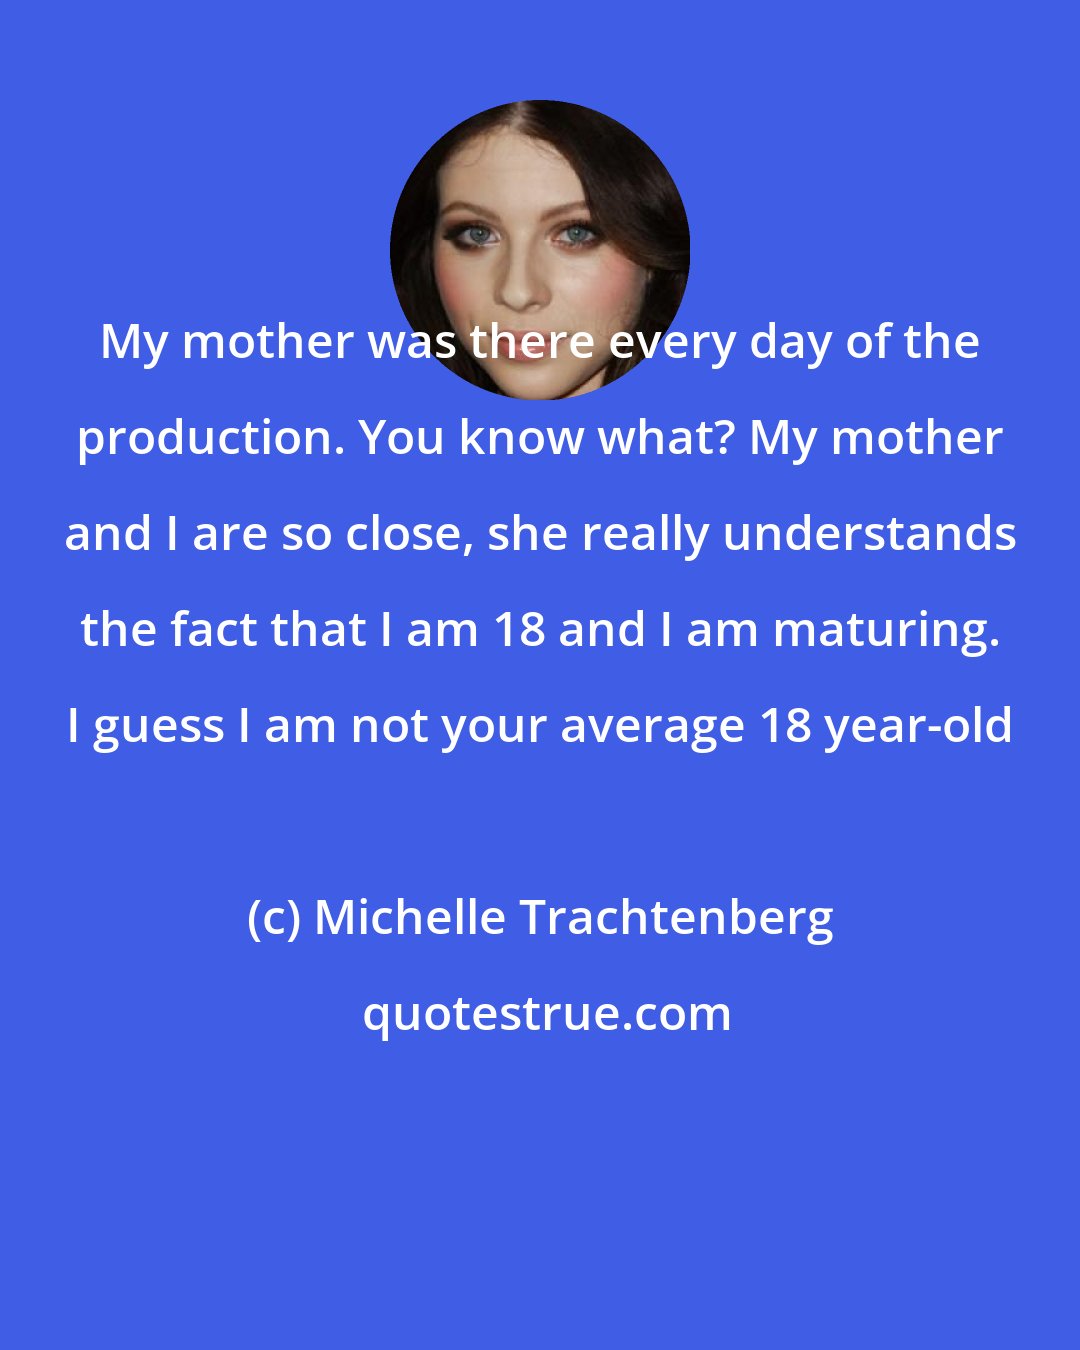 Michelle Trachtenberg: My mother was there every day of the production. You know what? My mother and I are so close, she really understands the fact that I am 18 and I am maturing. I guess I am not your average 18 year-old